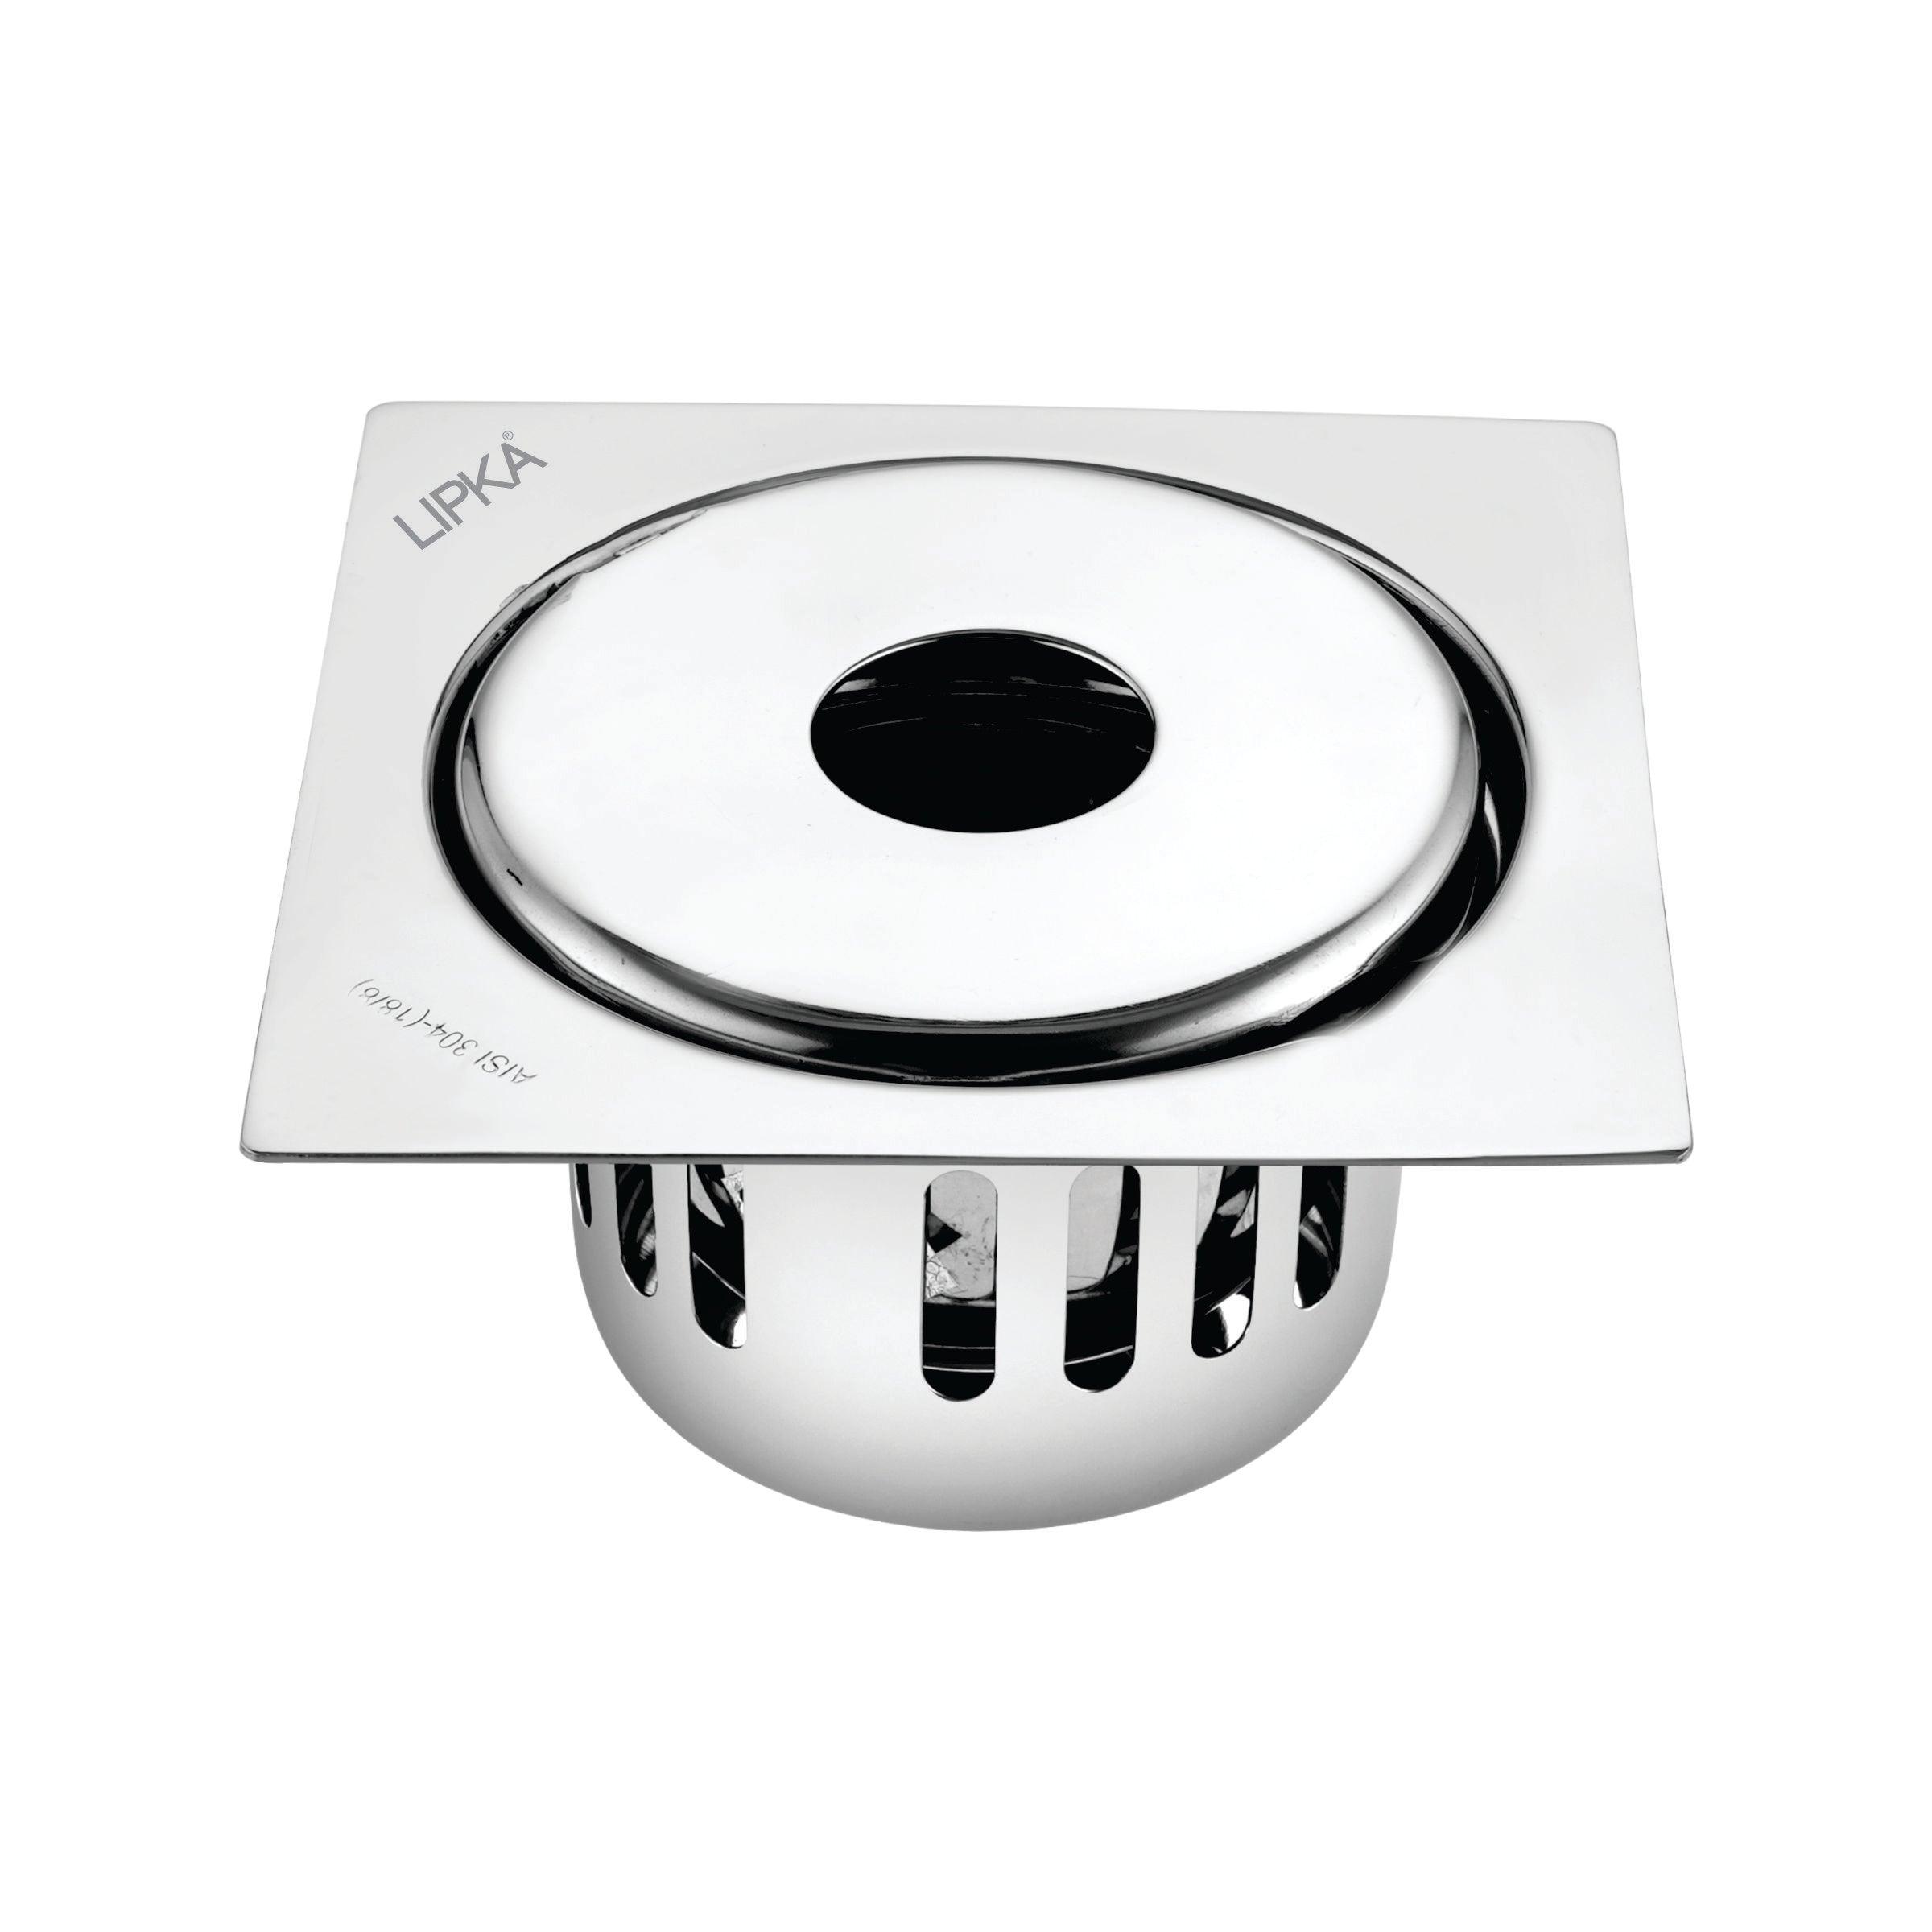 Full Moon Square Floor Drain (6 x 6 Inches) with Hole and Cockroach Trap - LIPKA - Lipka Home